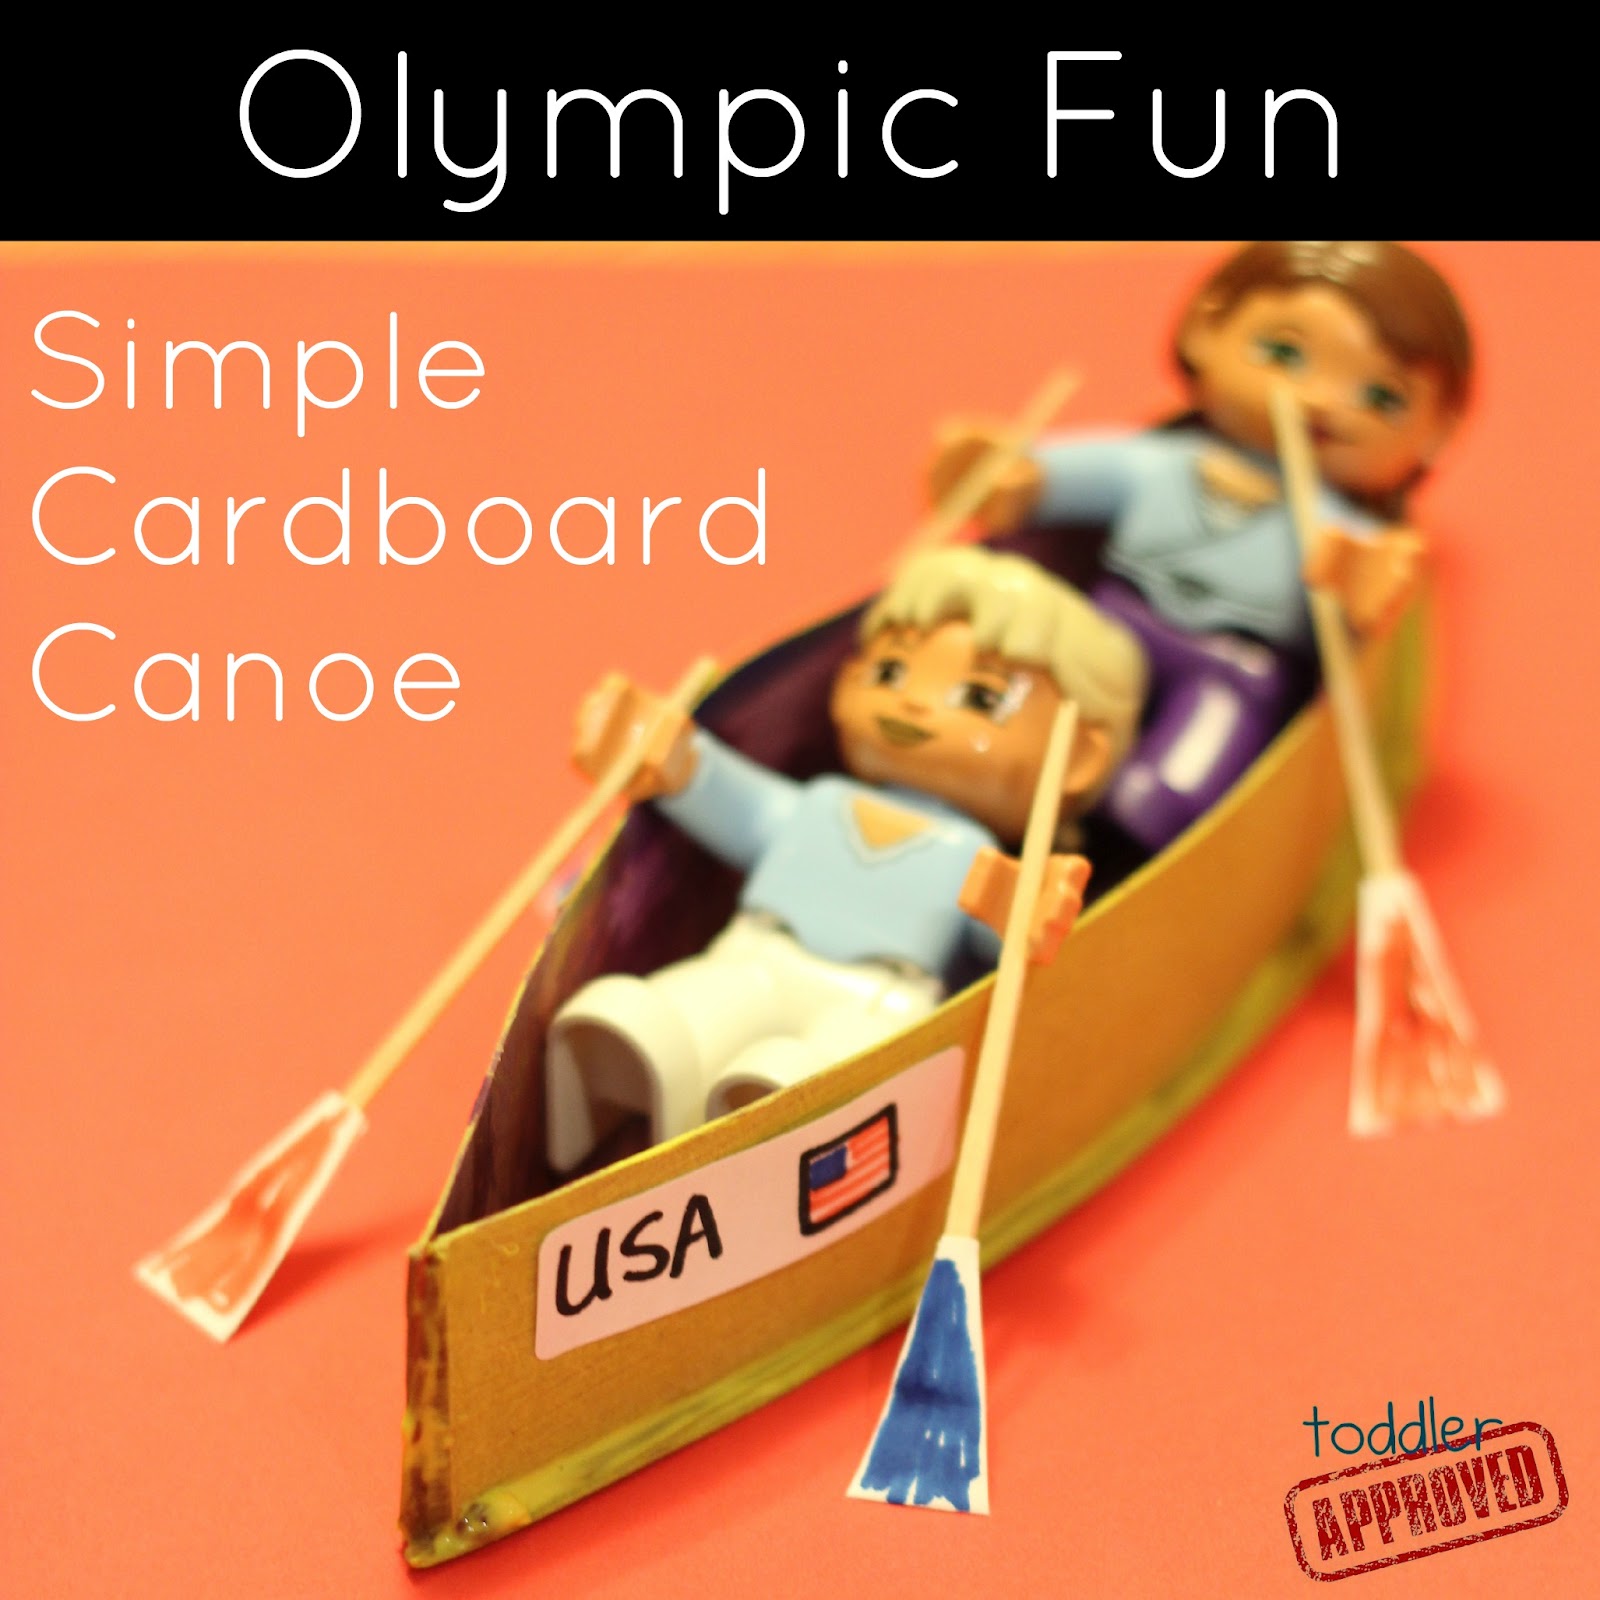 How to build a boat using cardboard Nilaz